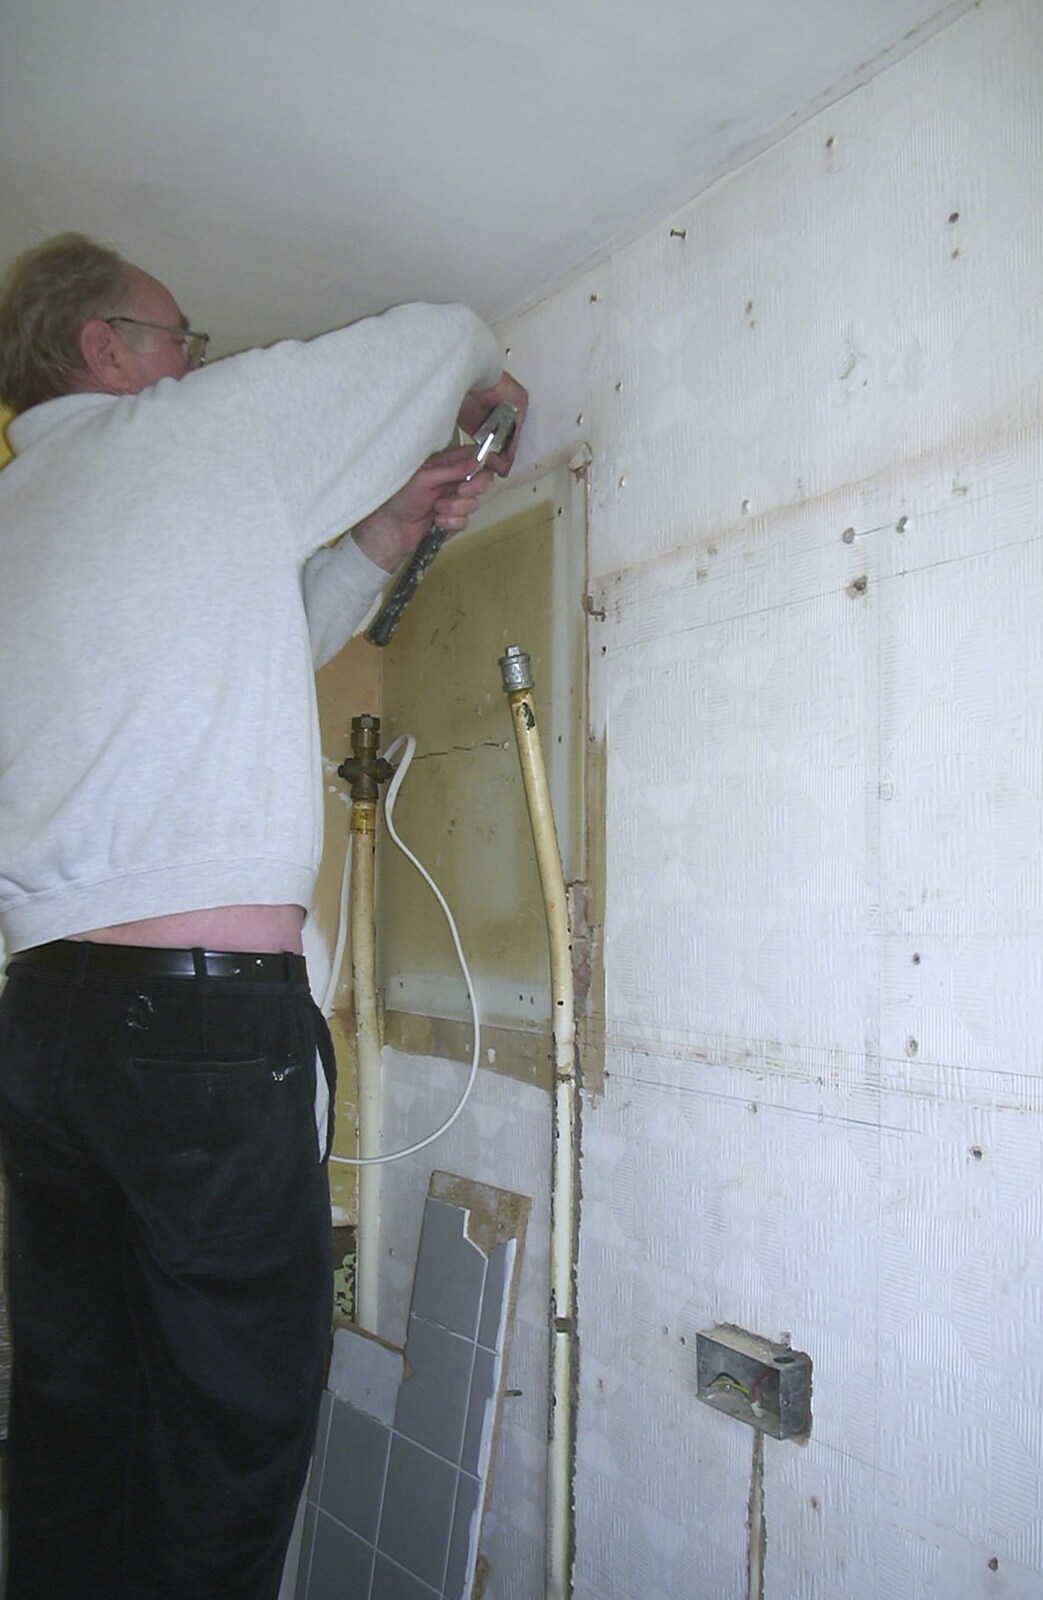 The Old Man pulls something out of the wall from Sis's Kitchen, Morden, London - 15th November 2001